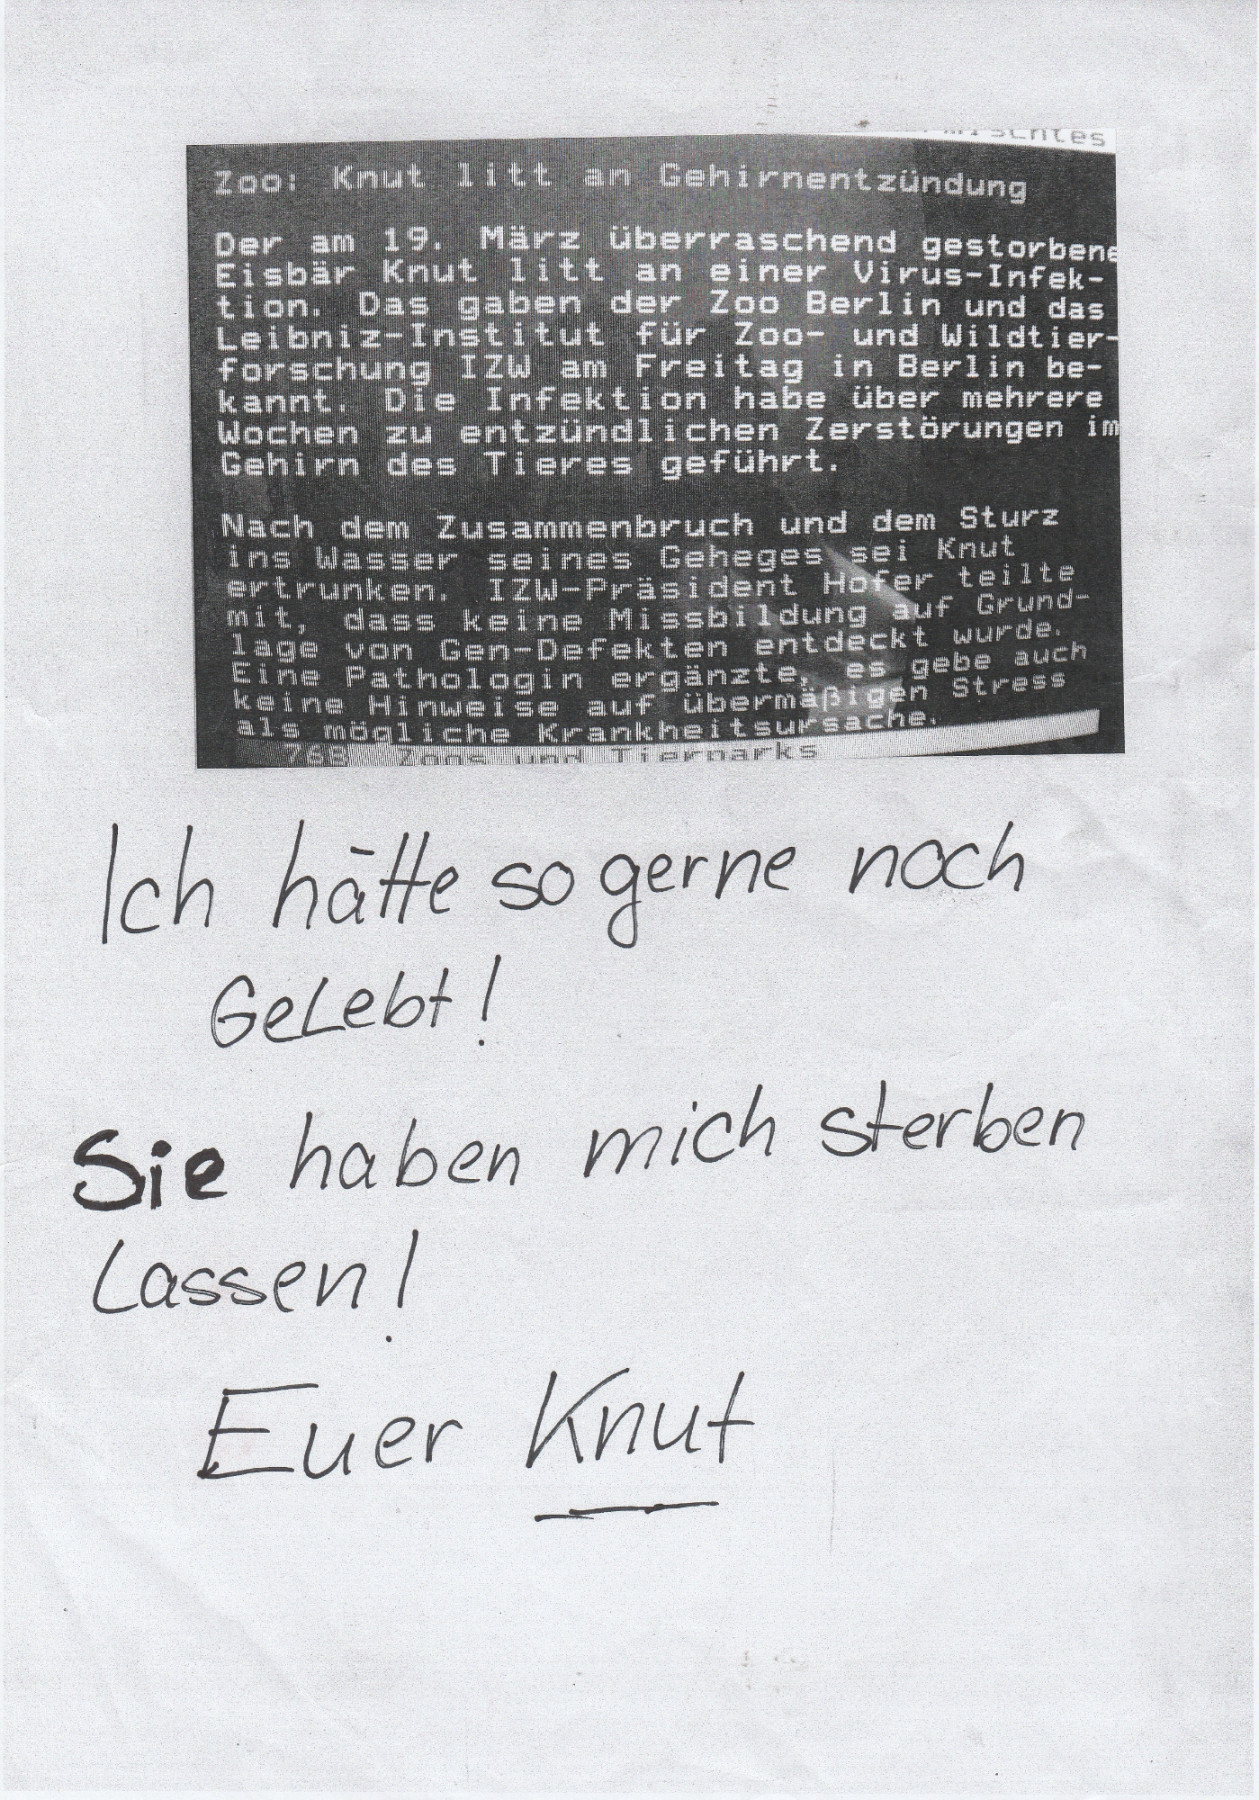 Hand-written telefax: “I would have loved to stay alive! You let me die! Yours, Knut". Above it, a photo of a teletext: "Zoo: Knut suffered from encephalitis. The polar bear Knut, who died suddenly on 19 March, was suffering from a viral infection (…) no deformities due to genetic defects (…) no indications of excessive stress"